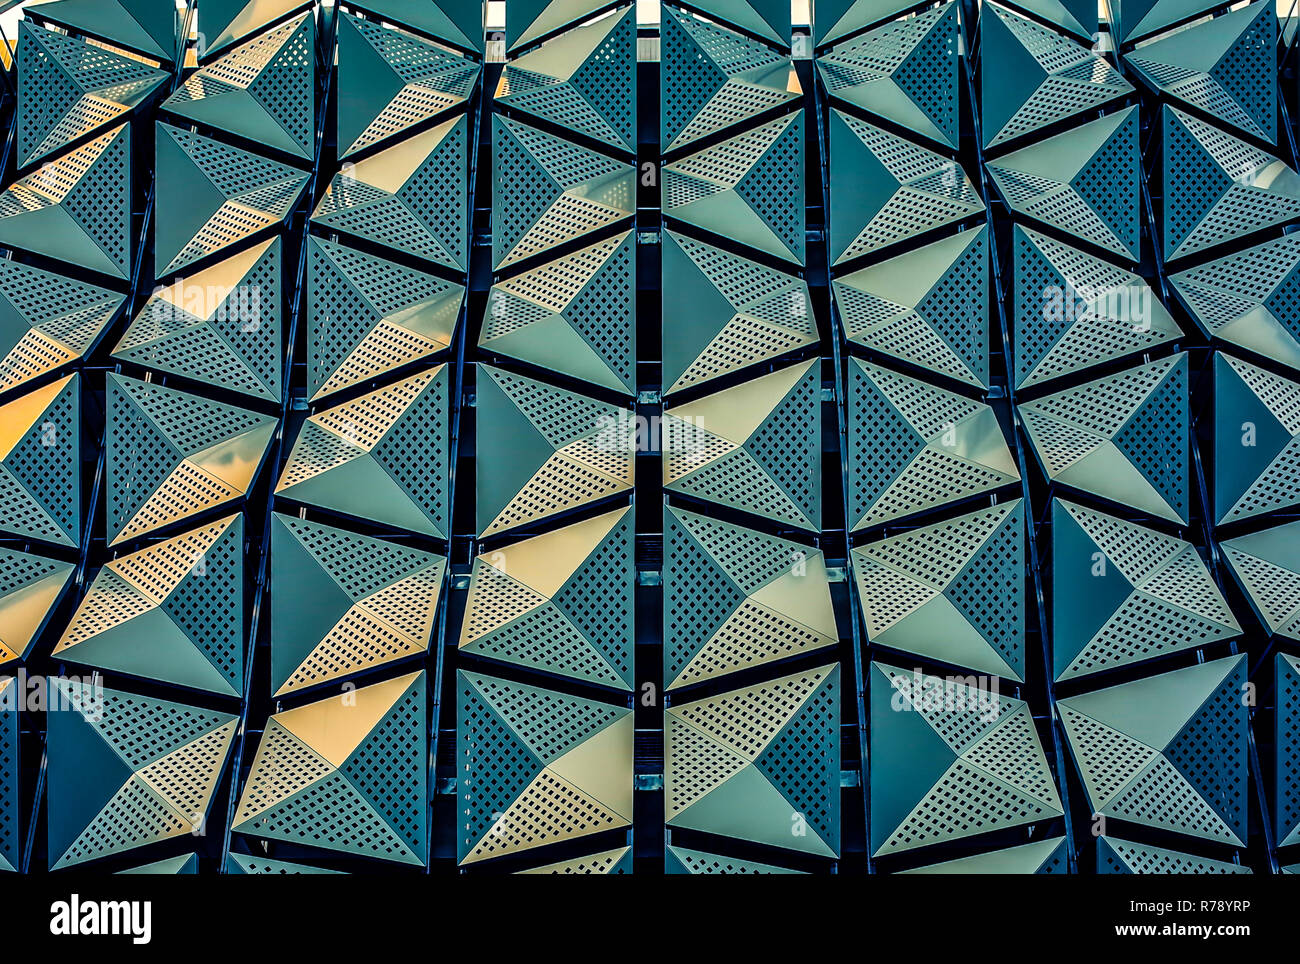 Symmetry and Pattern on the extrior of a building Stock Photo